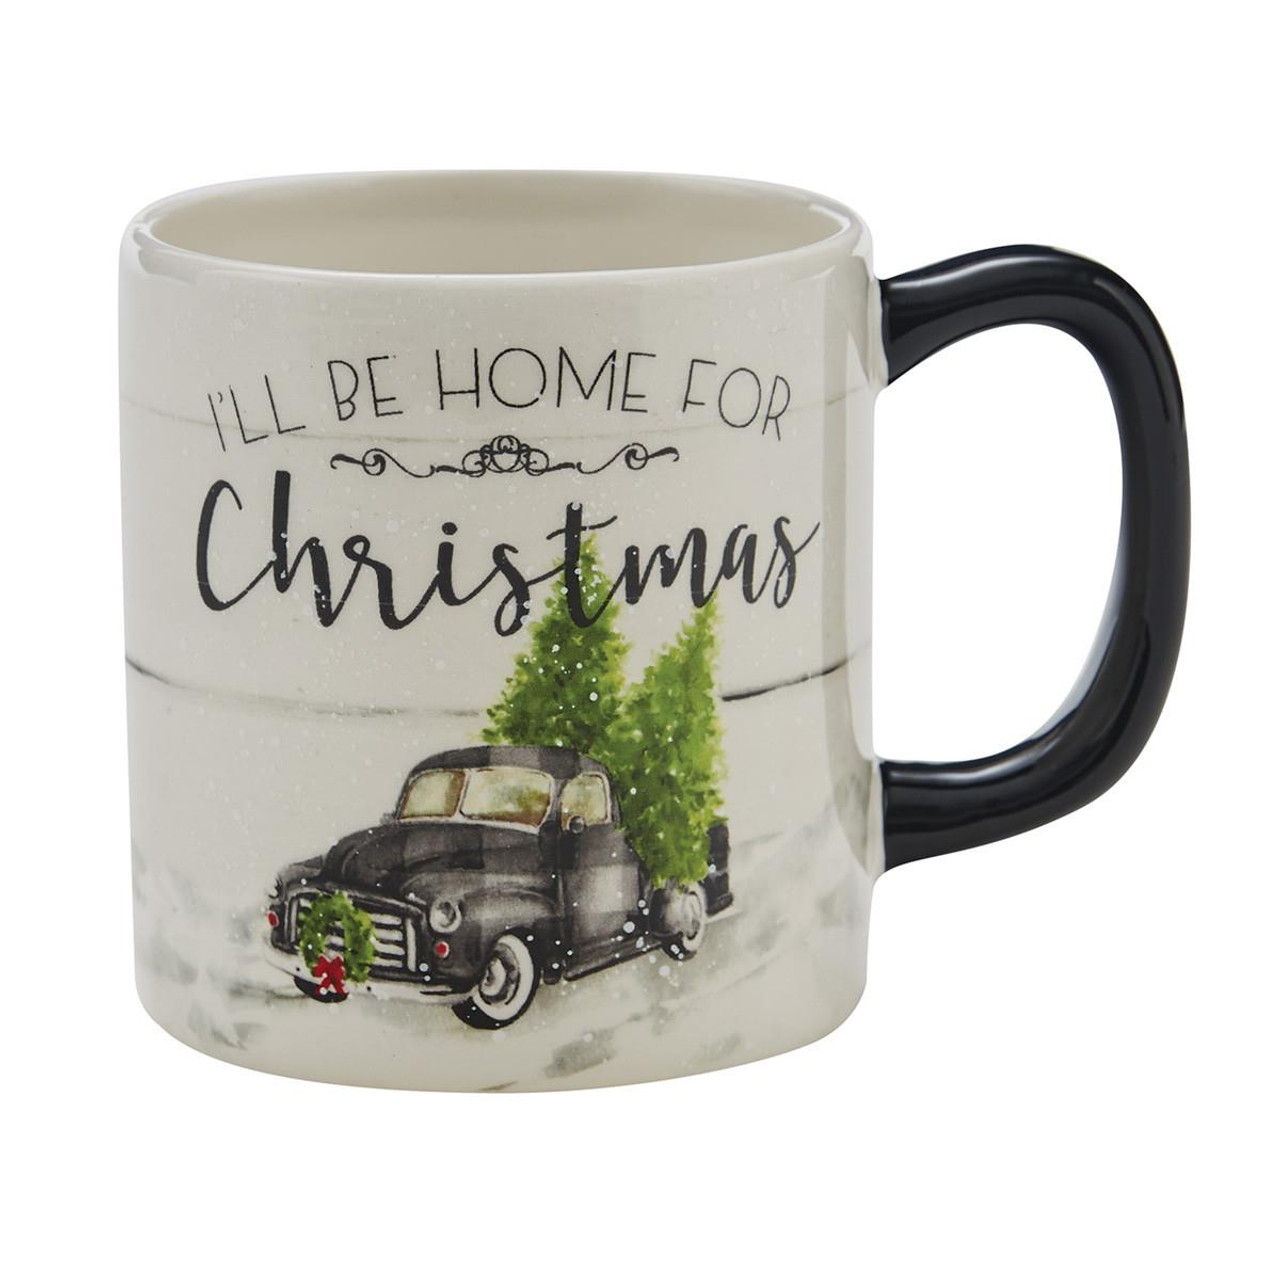 https://cdn11.bigcommerce.com/s-tfdhmk/images/stencil/1280x1280/products/20846/155210/Home-For-Christmas-Mugs-Set-of-4-762242032286_image1__86094.1667559147.jpg?c=2